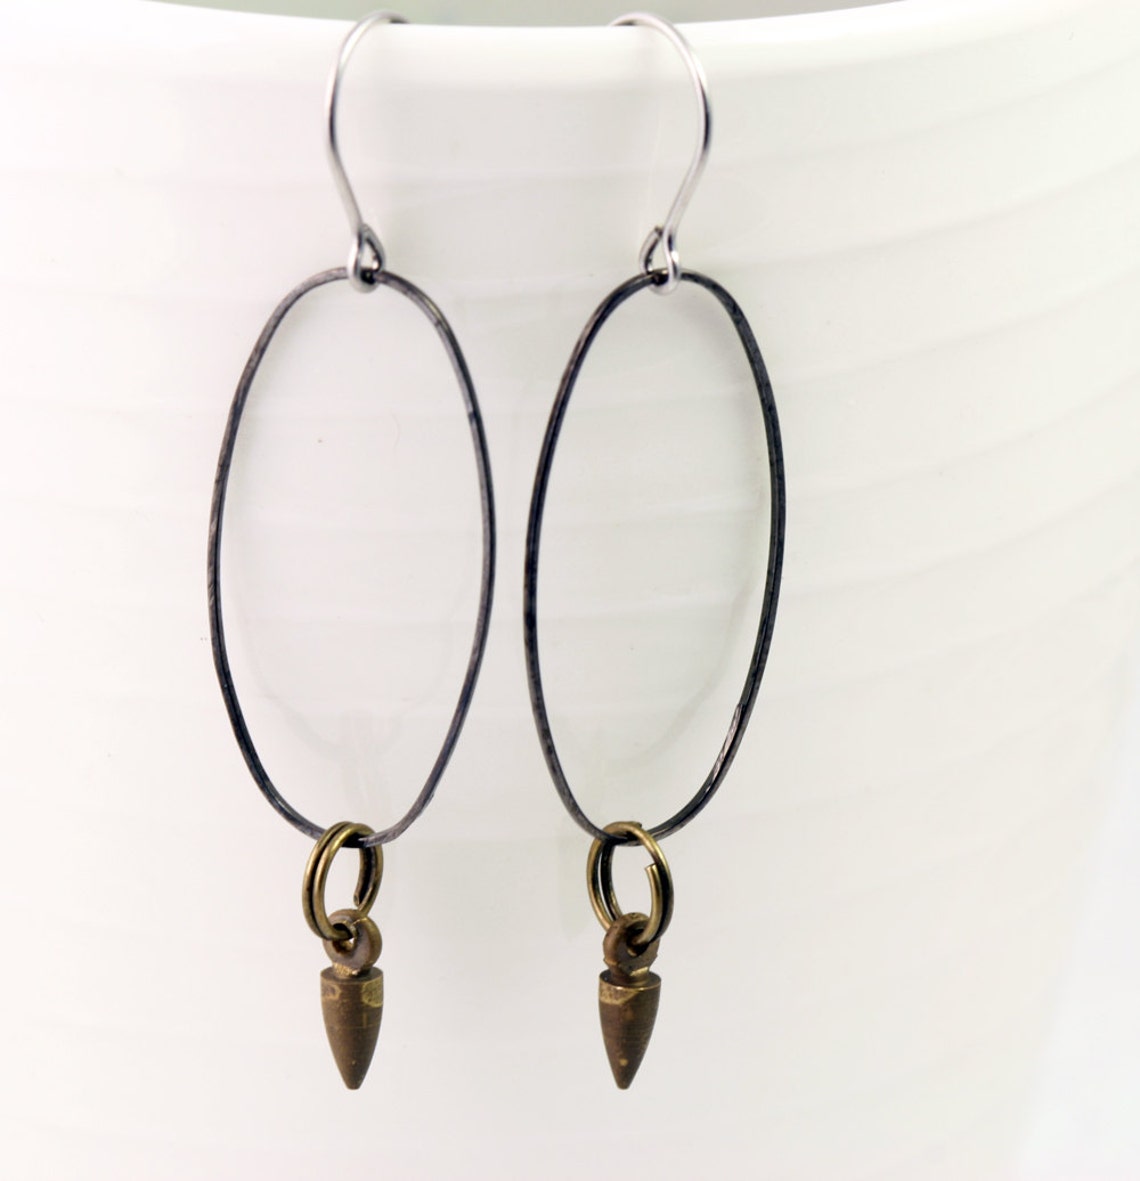 Spike and Hoop Earrings, Edgy Style Industrial Jewelry